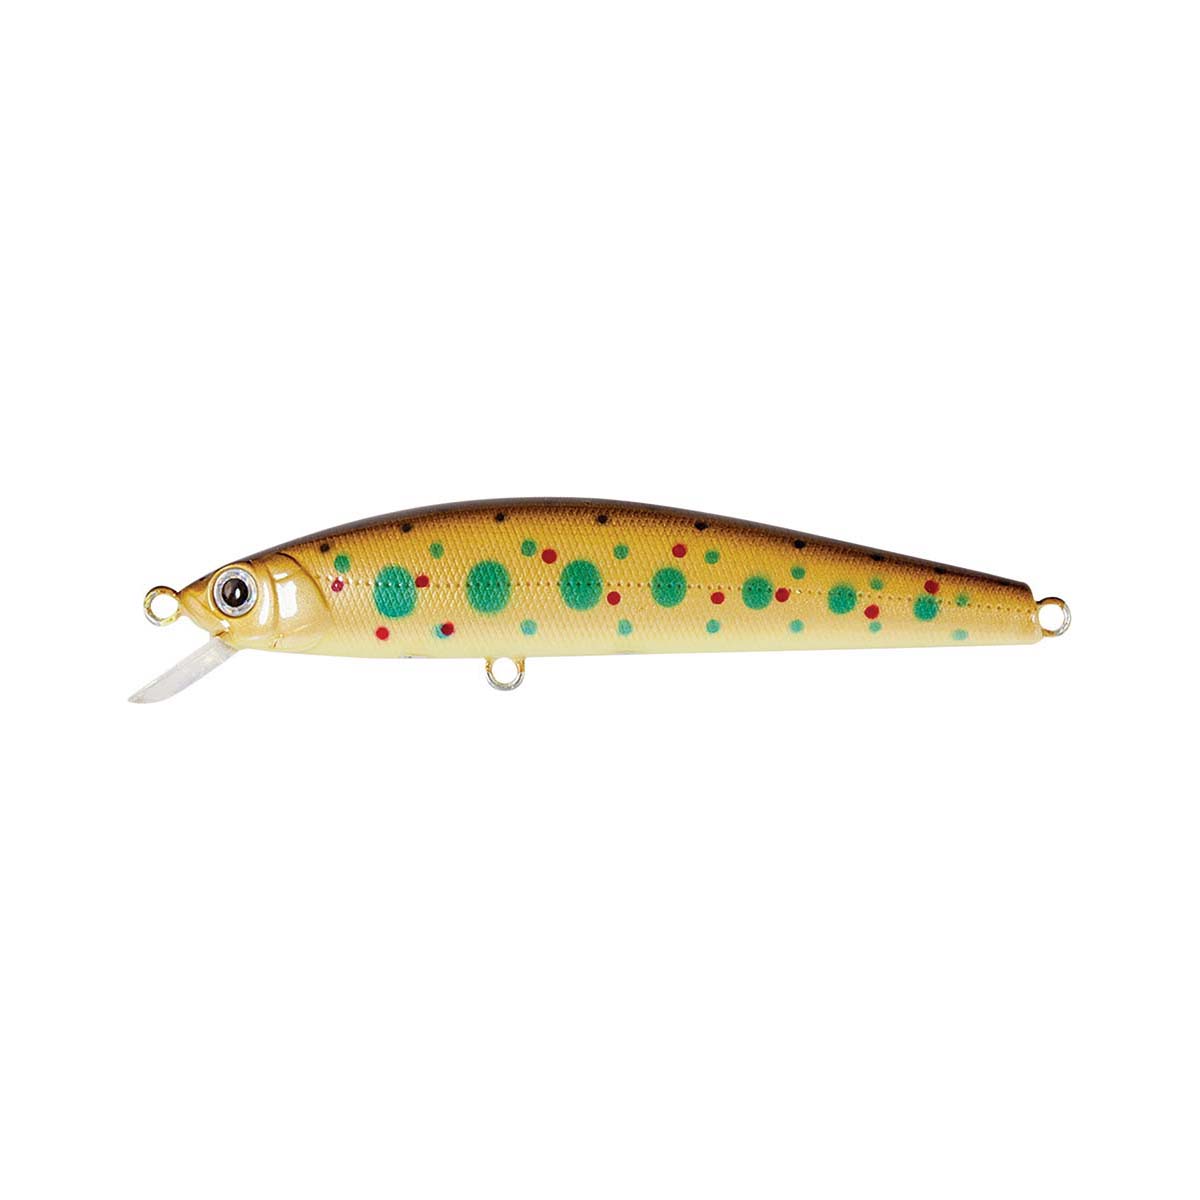 Atomic Hards Jerk Minnow Hard Body Lure 80mm Brown Trout